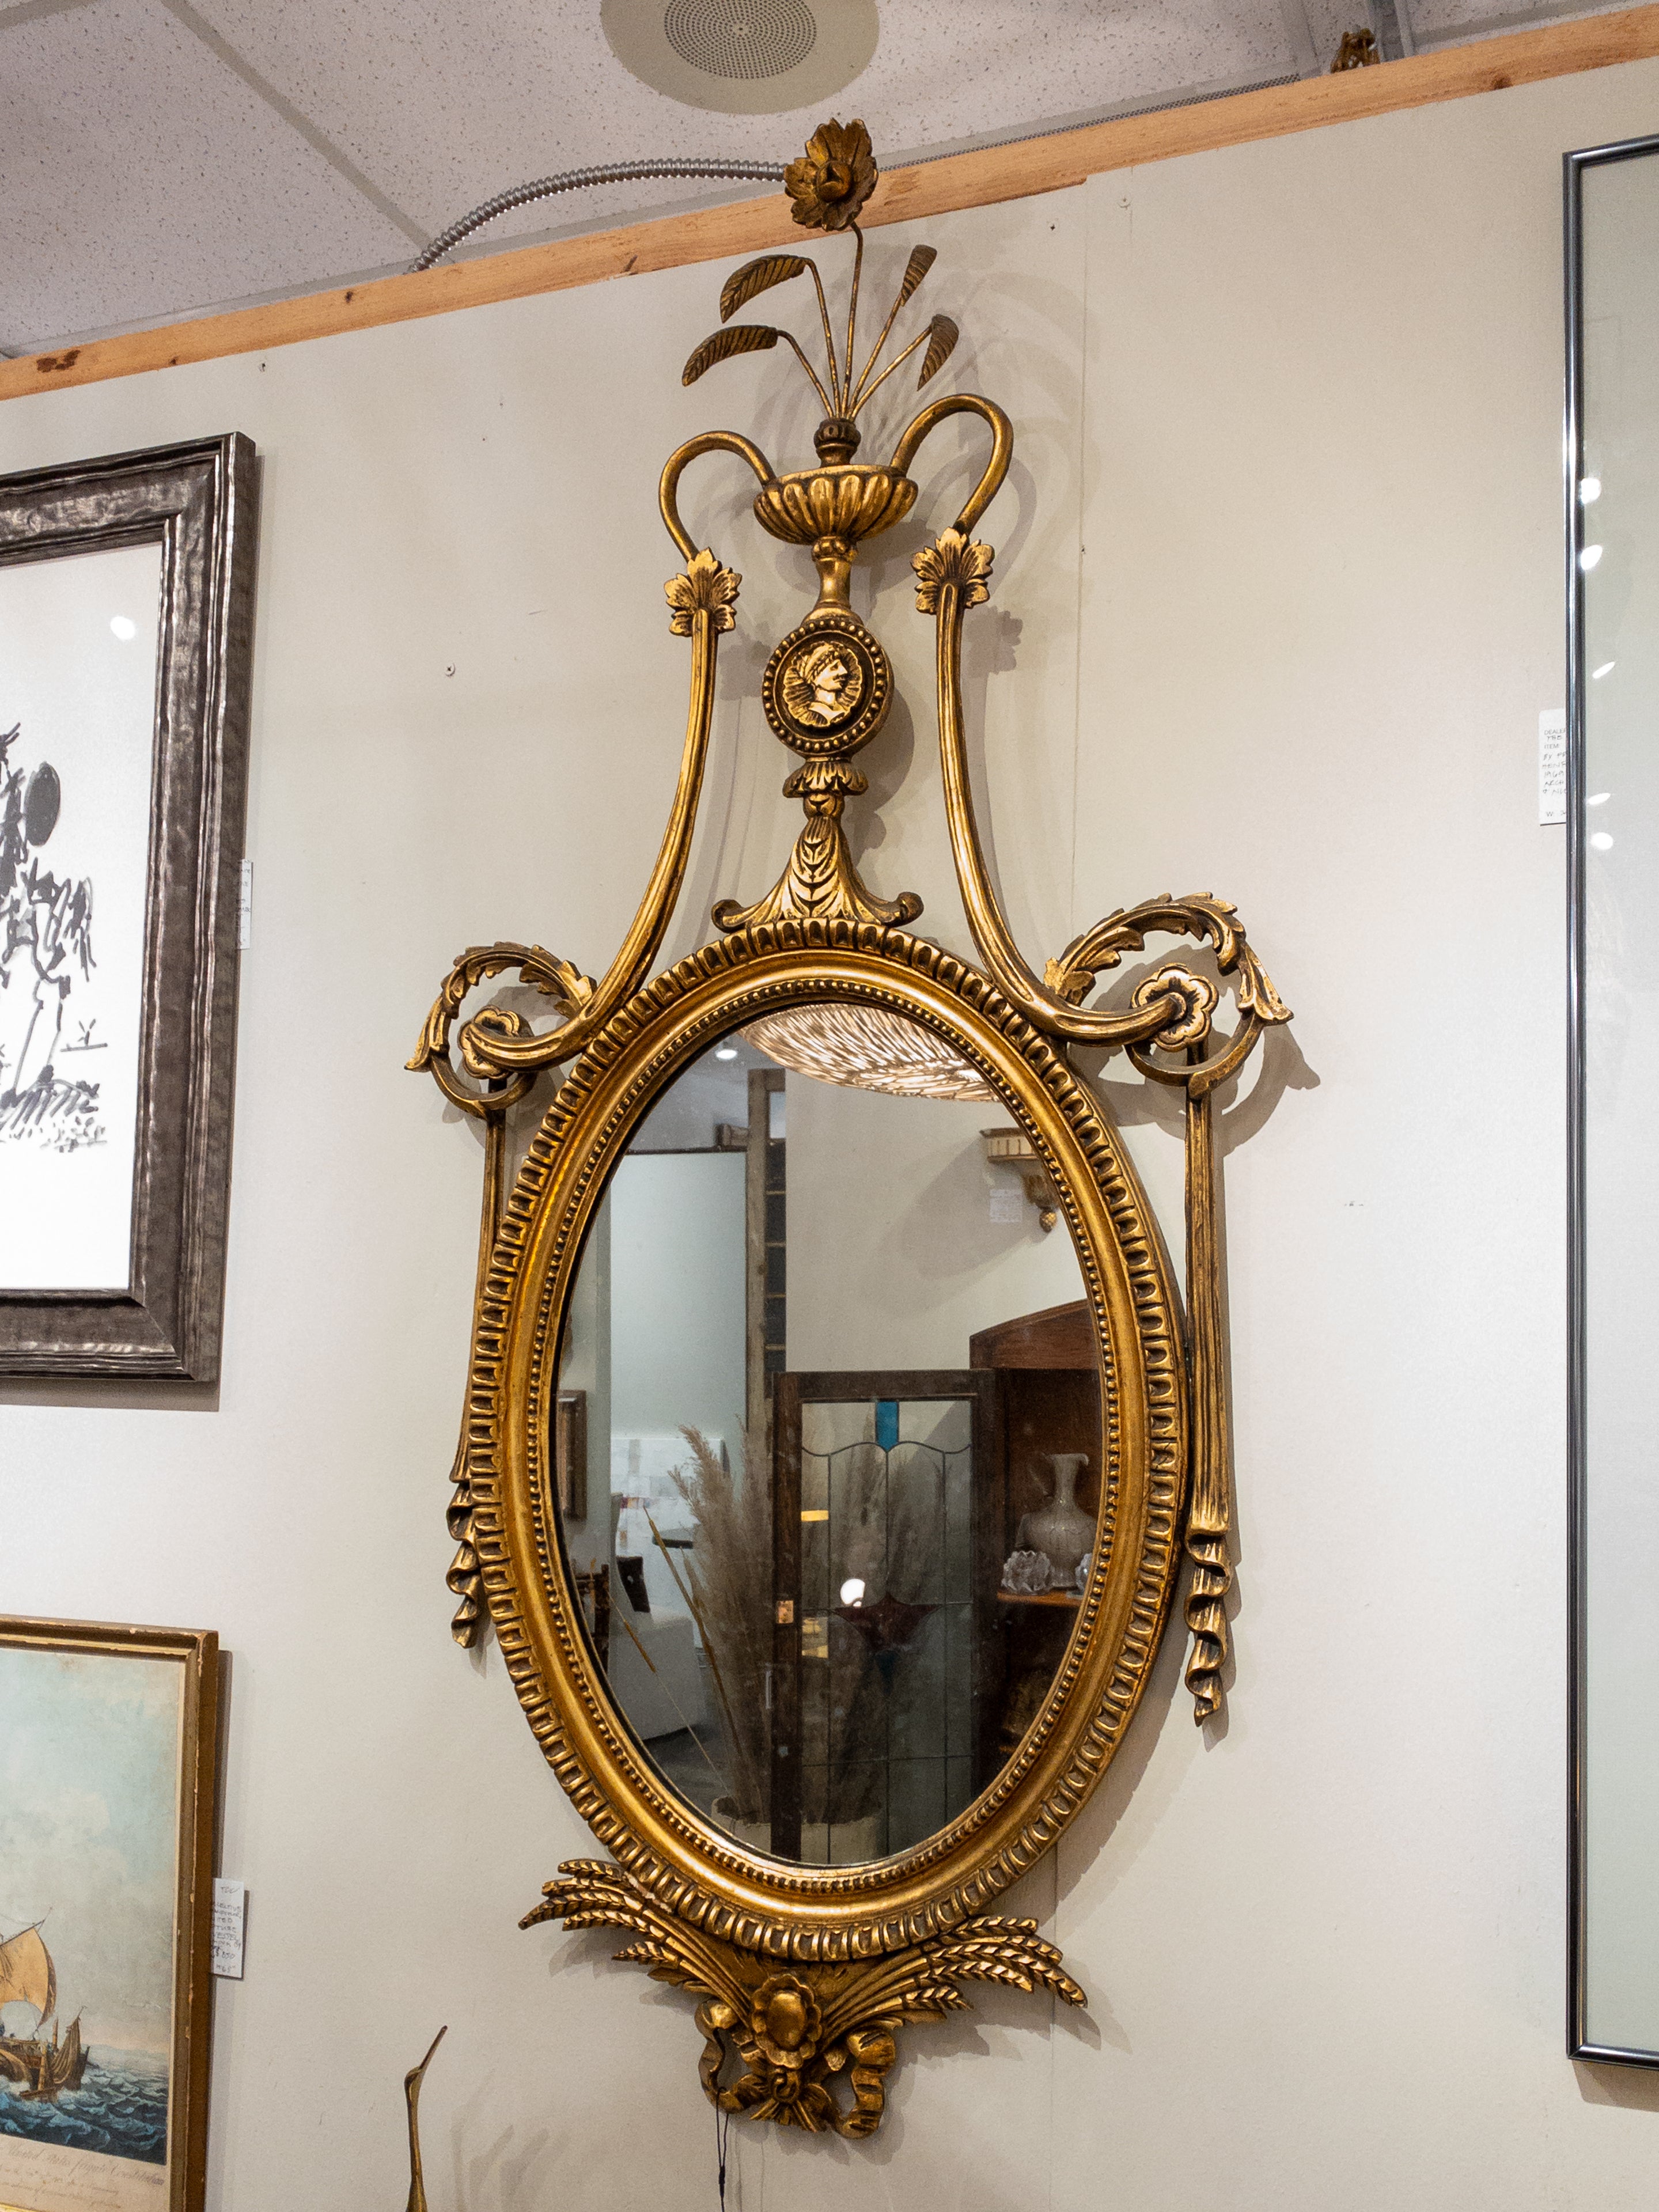 The 19th Century Giltwood French Mirror is an exquisite example of antique craftsmanship, epitomizing the opulence and attention to detail characteristic of the 19th-century French design. This ornate mirror is adorned with intricate details that